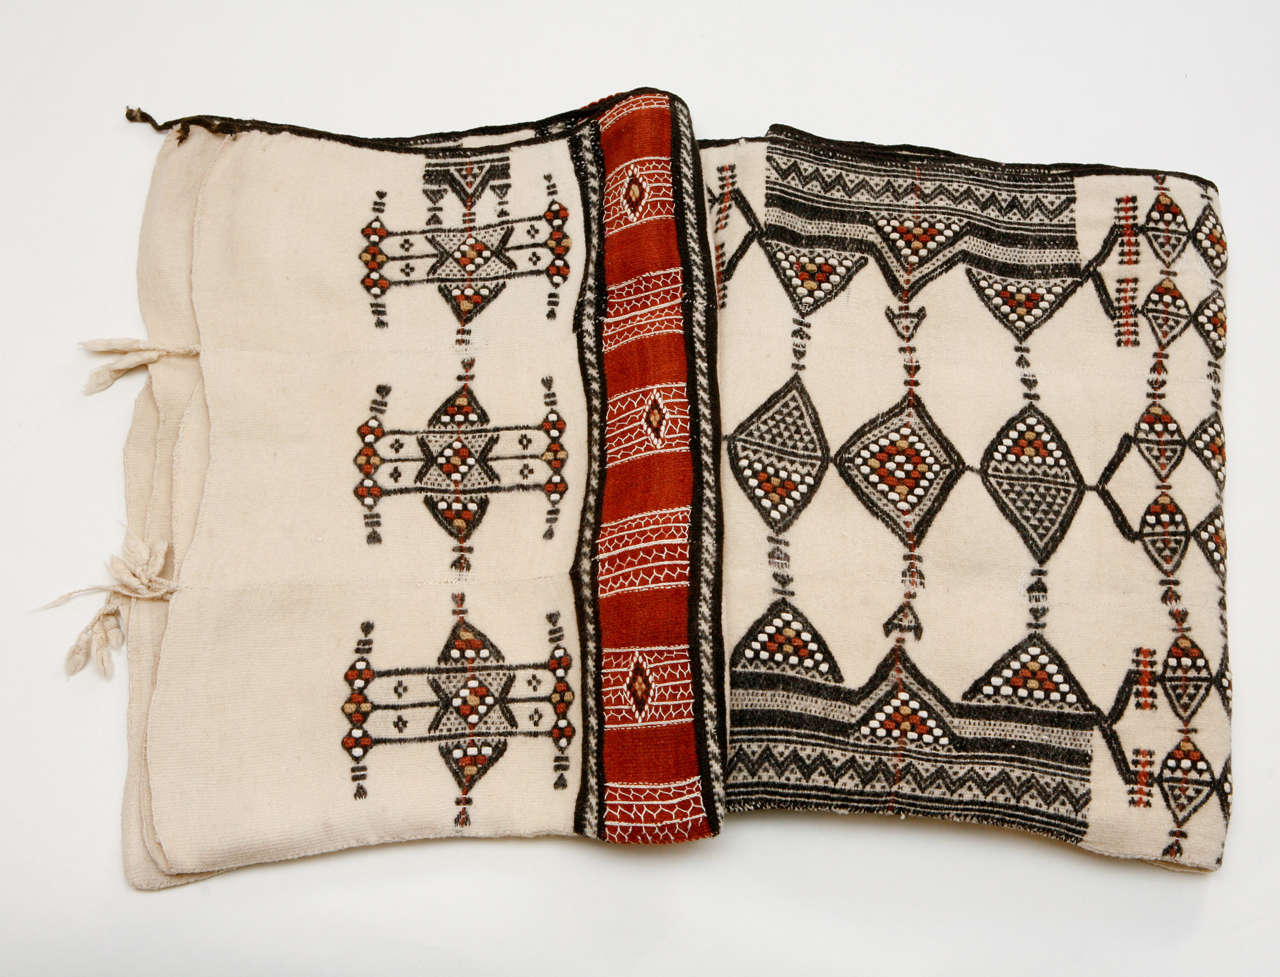 Spft white wool with red, black and brown inset weaving and embroidery.  Shown folded.  It is oblong,     x        .  Traditional blanket for Fulani tribal weddings  (West, Central and Sudanese Africa).